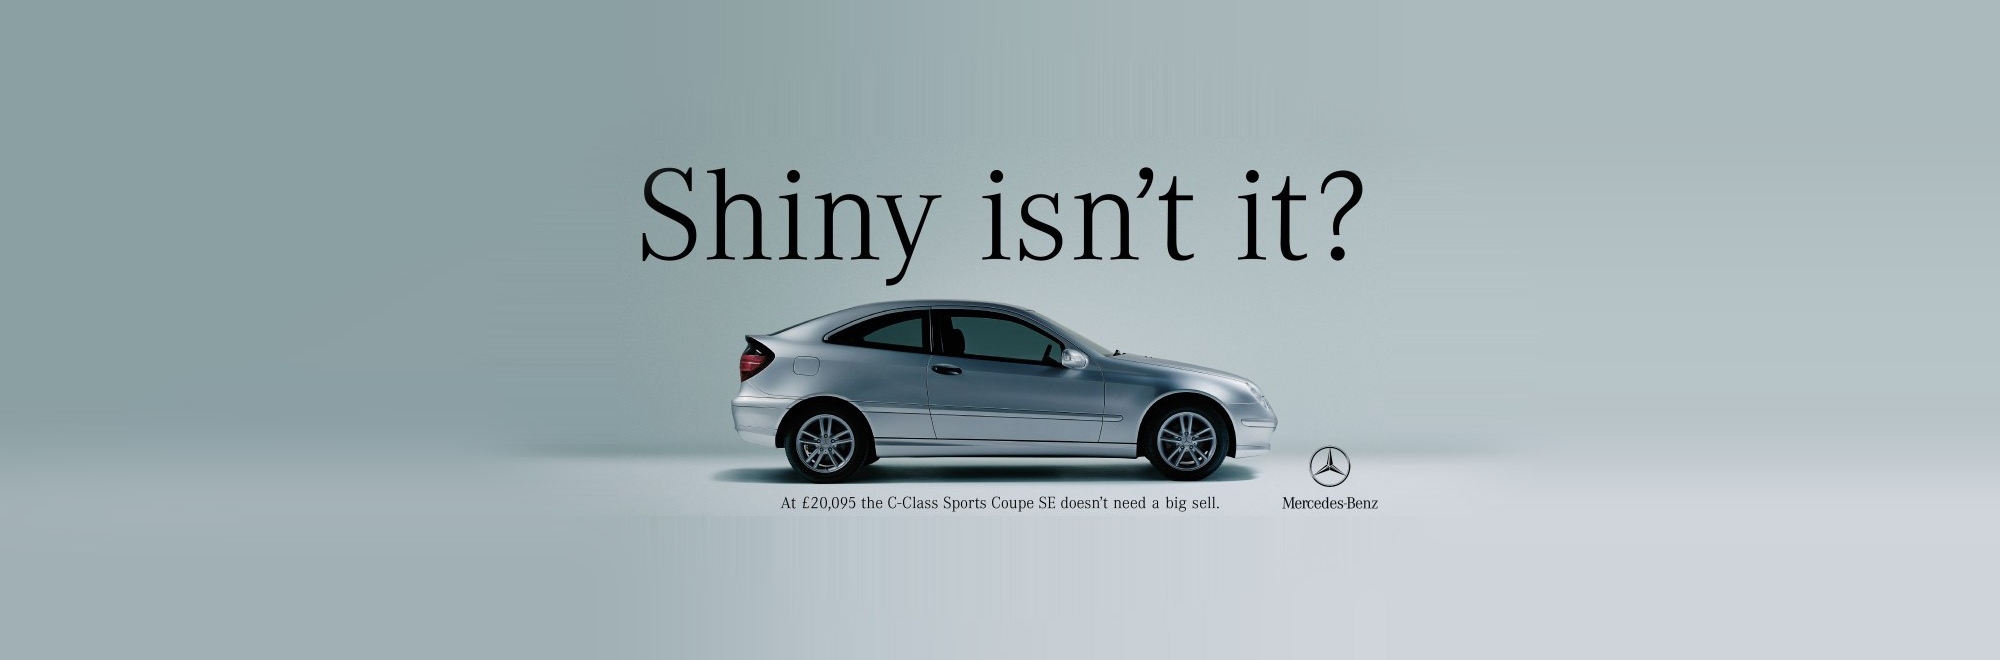 Straight-talking ads without the cliches from Mercedes-Benz